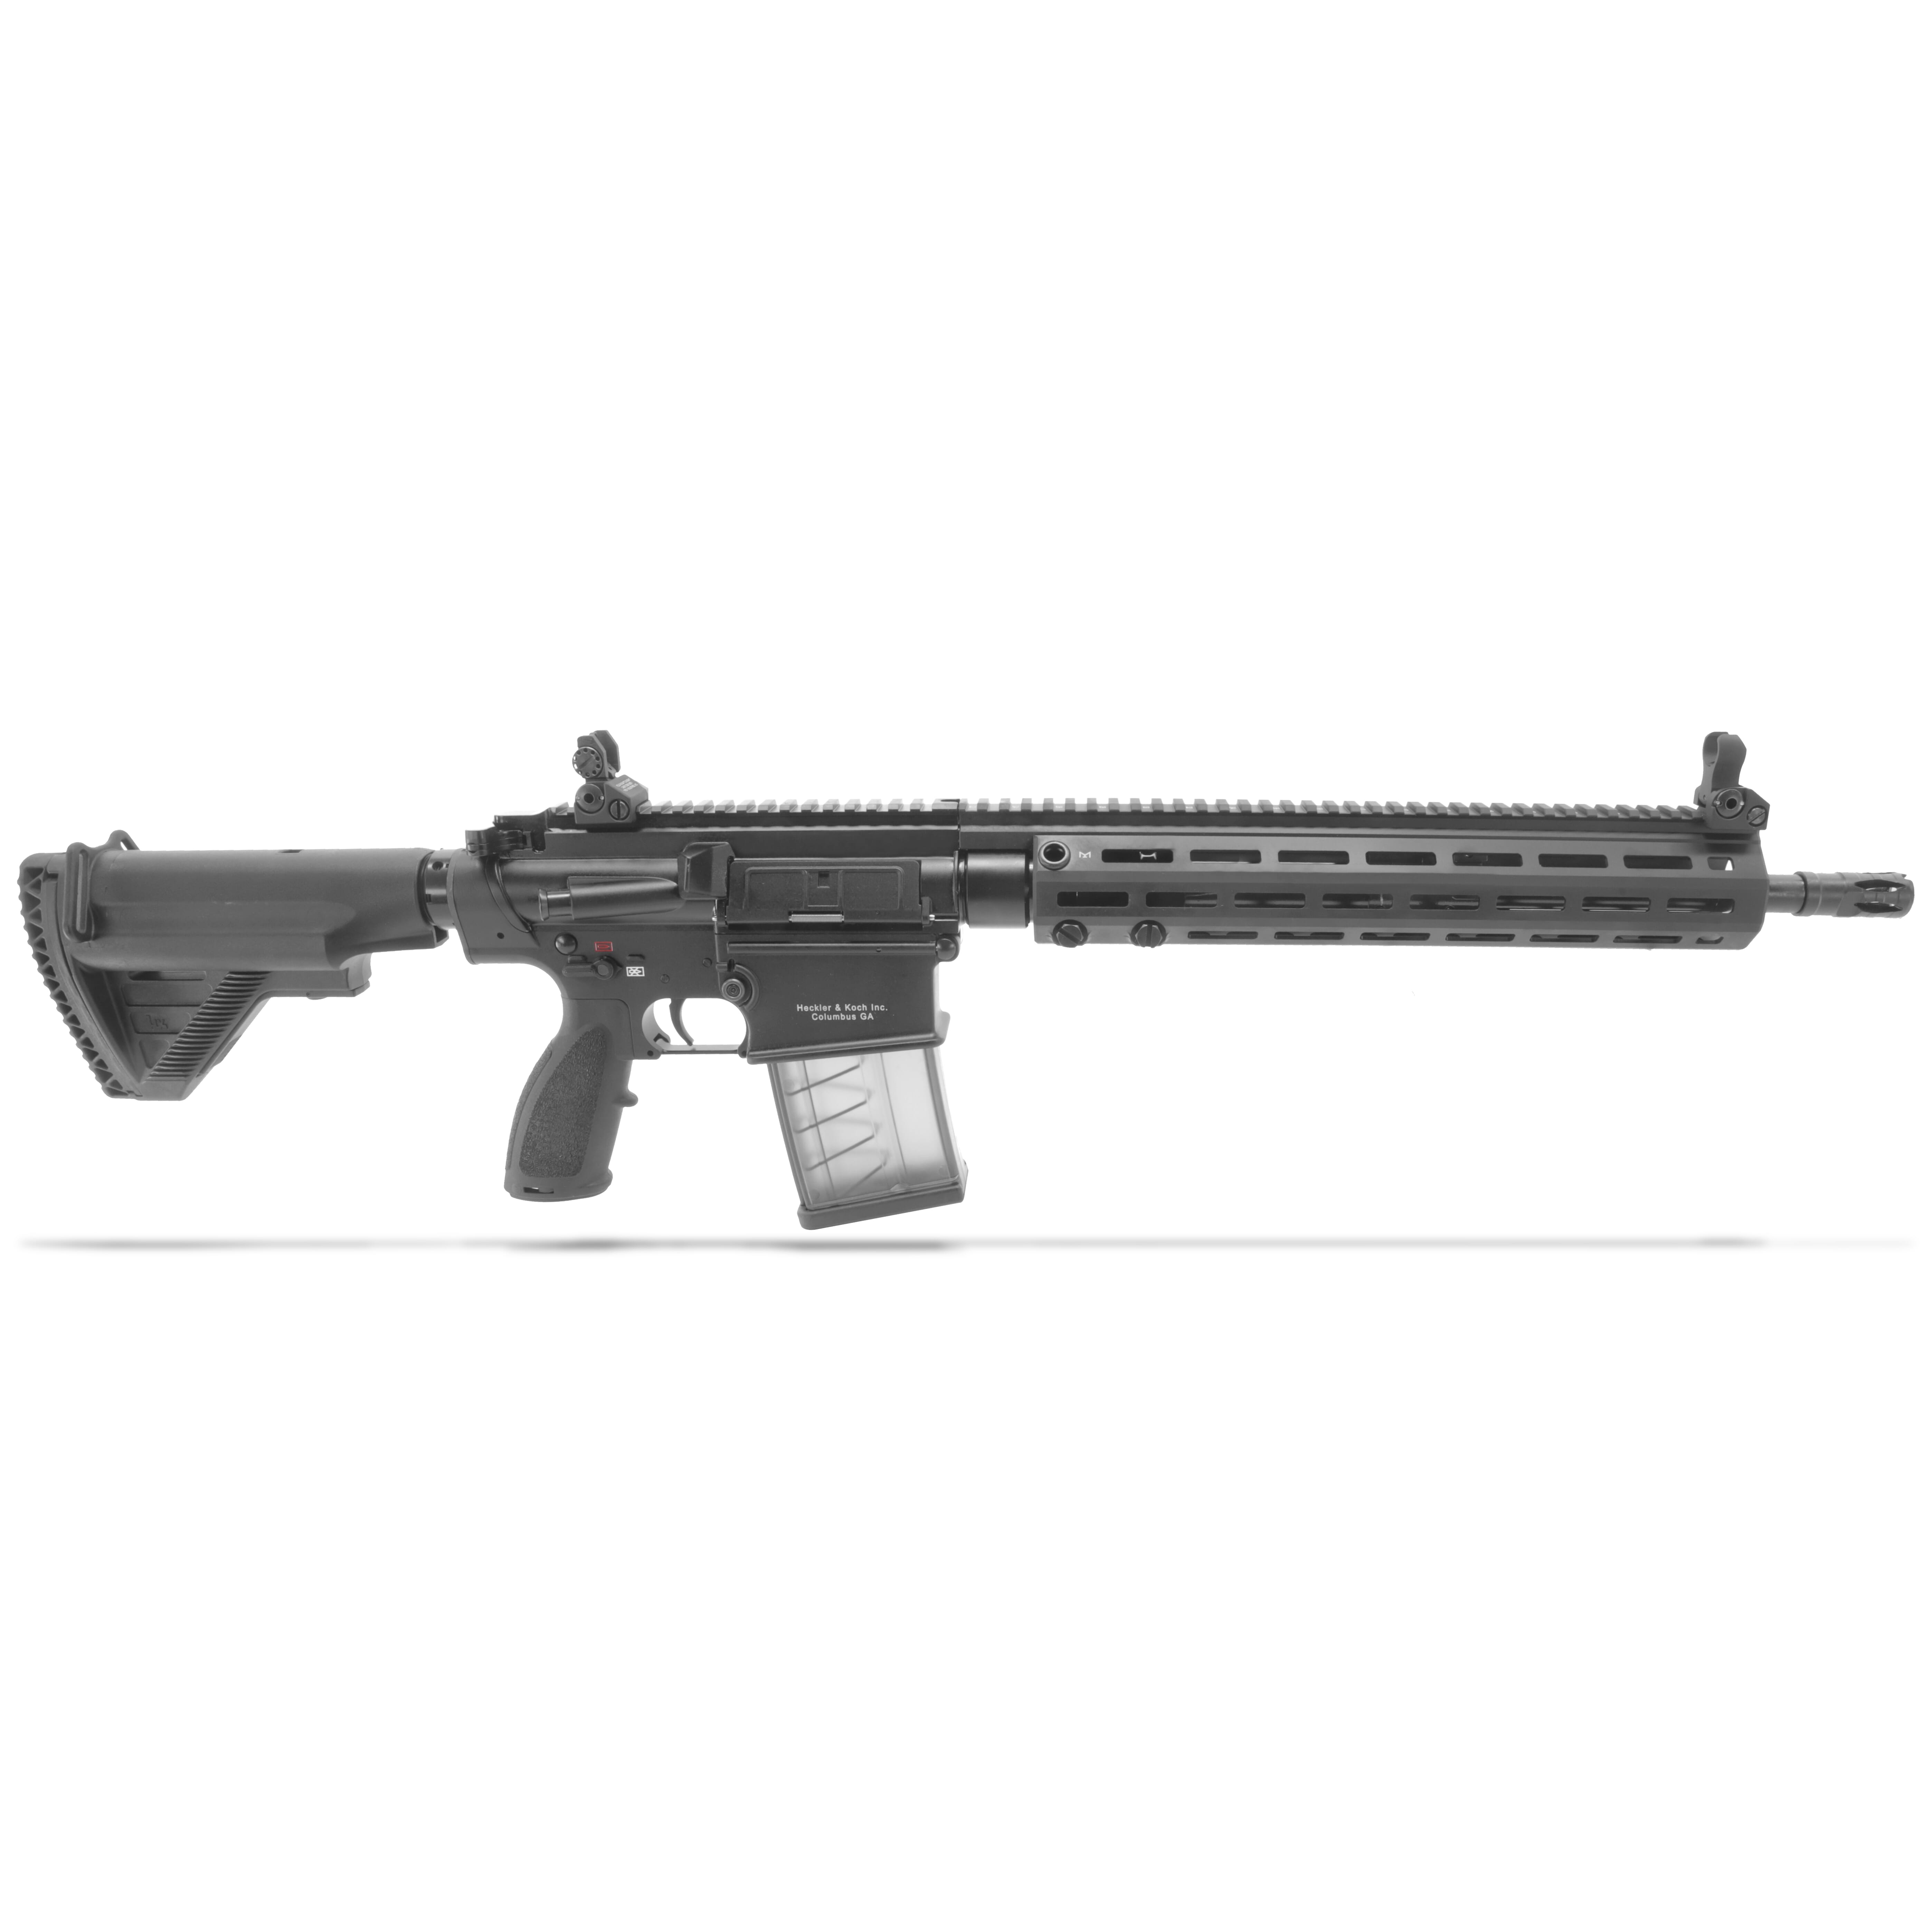 HK MR762A1 7.62mm Semi-Auto 16.5" Bbl Rifle with (1) 20rd Mag 81000540